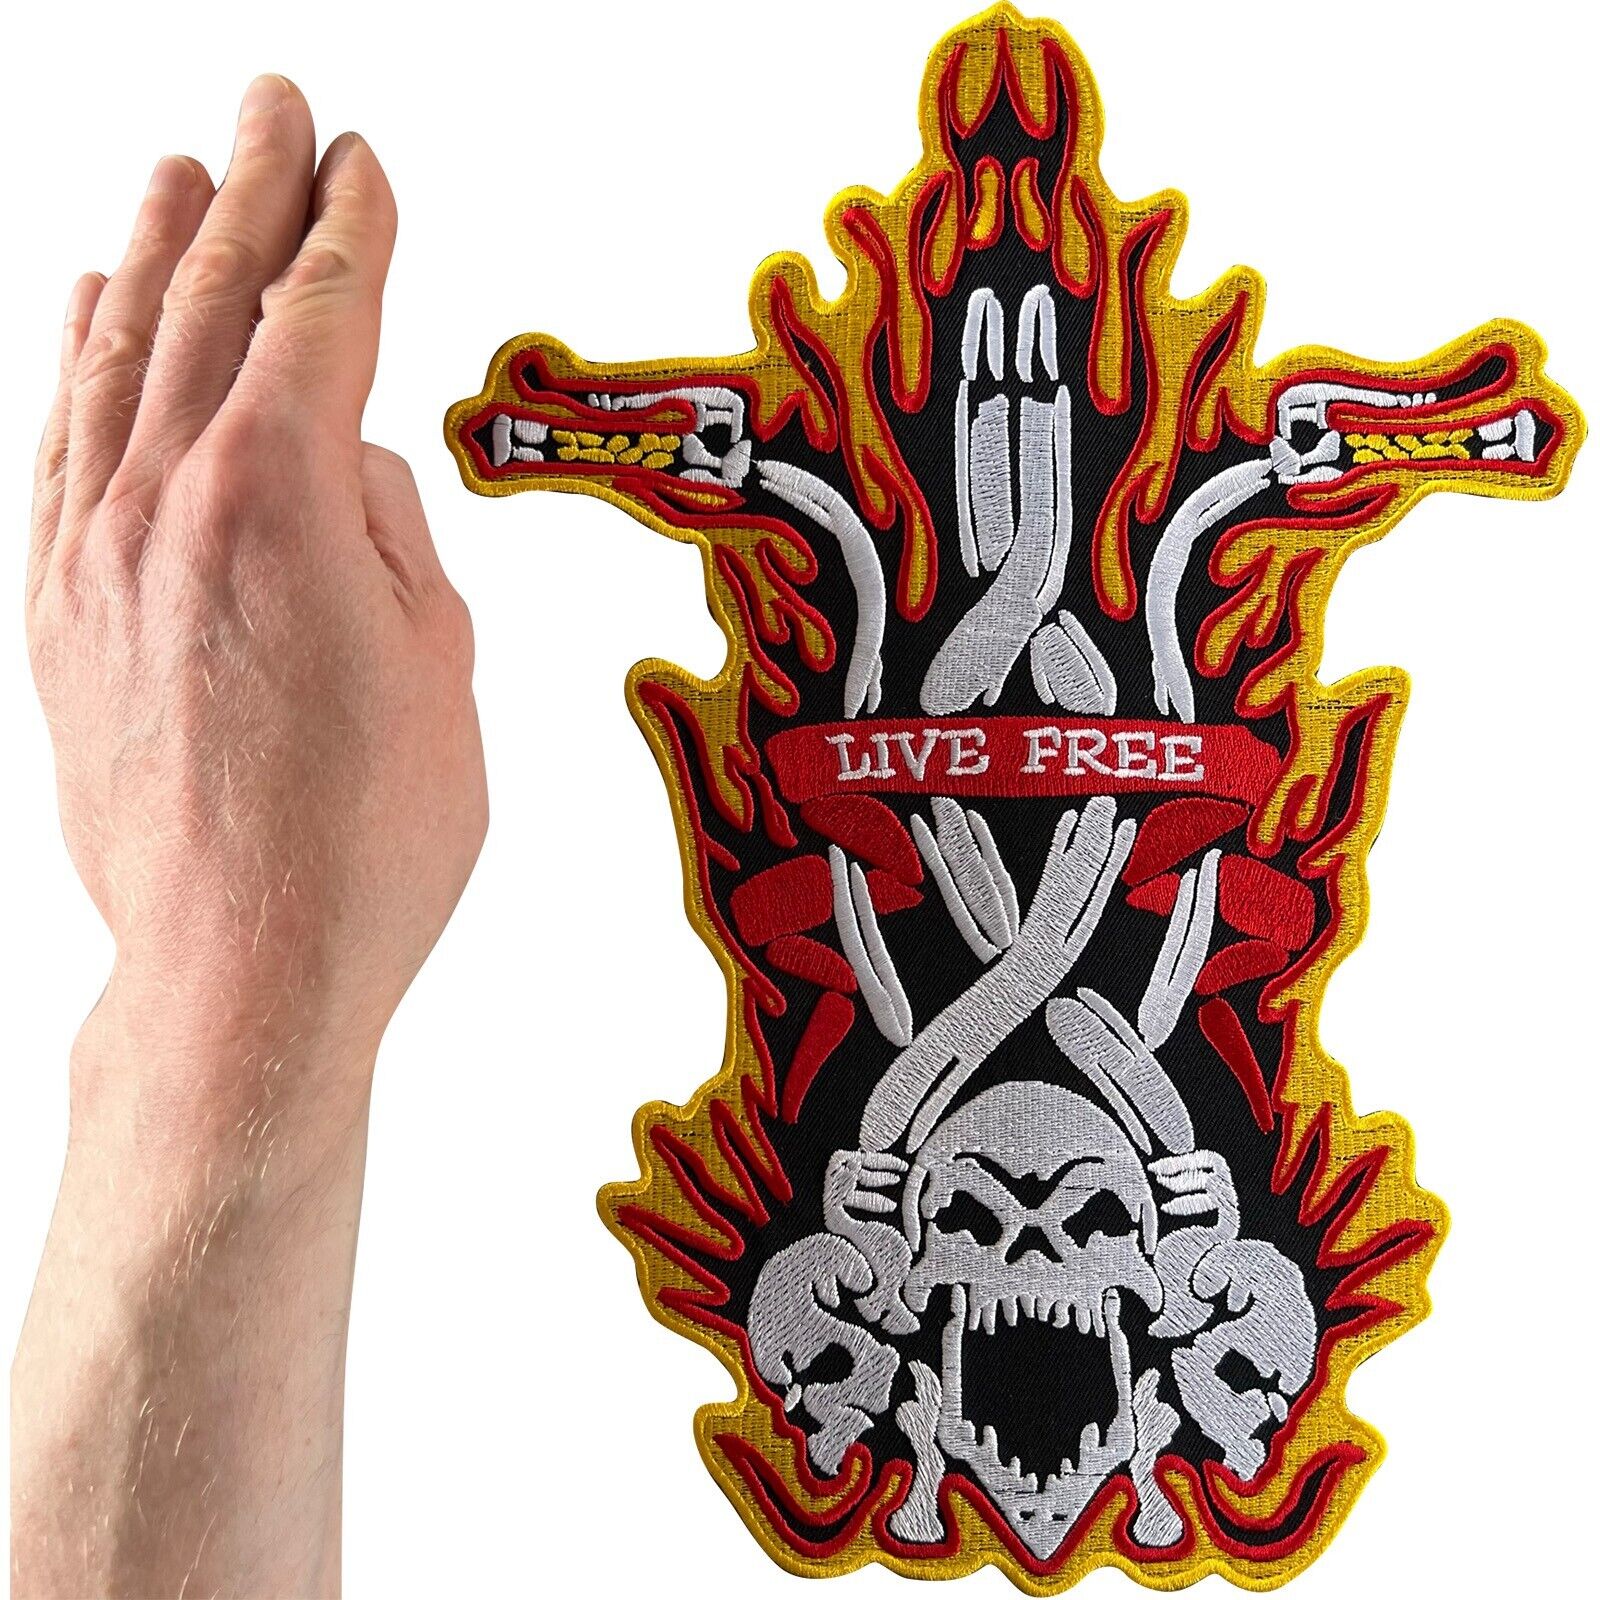 Big Large Live Free Patch Iron Sew On Skull Motorbike Flames Embroidered Badge